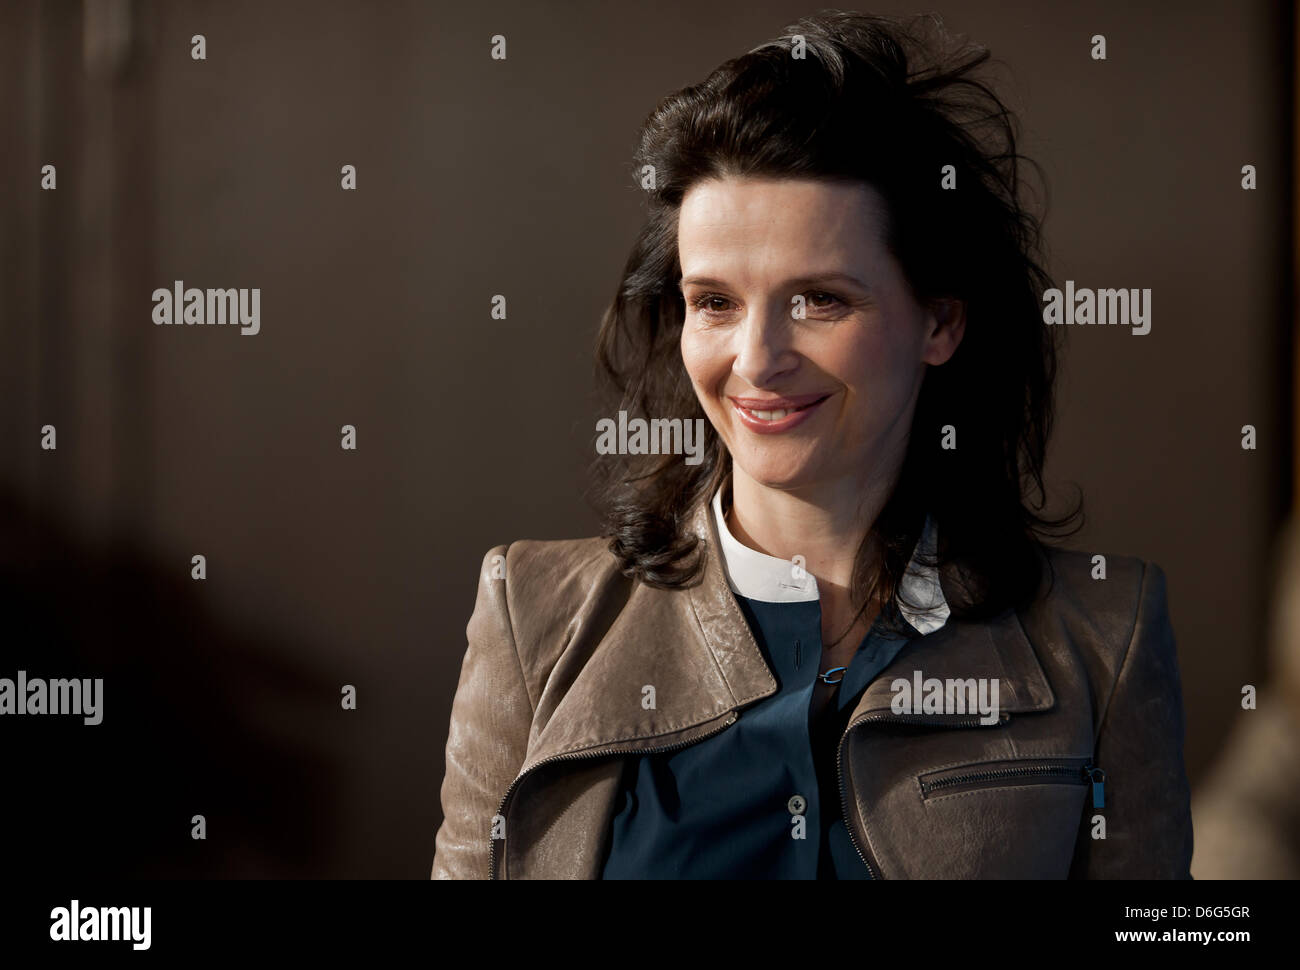 French actress Juliette Binoche poses at a photocall for the movie  Elles  during the 62nd Berlin International Film Festival, in Berlin, Germany, 10 February 2012. The movie is presented in the section Panorama Special at the 62nd Berlinale running from 09 to 19 February. Photo: Tim Brakemeier dpa  +++(c) dpa - Bildfunk+++ Stock Photo